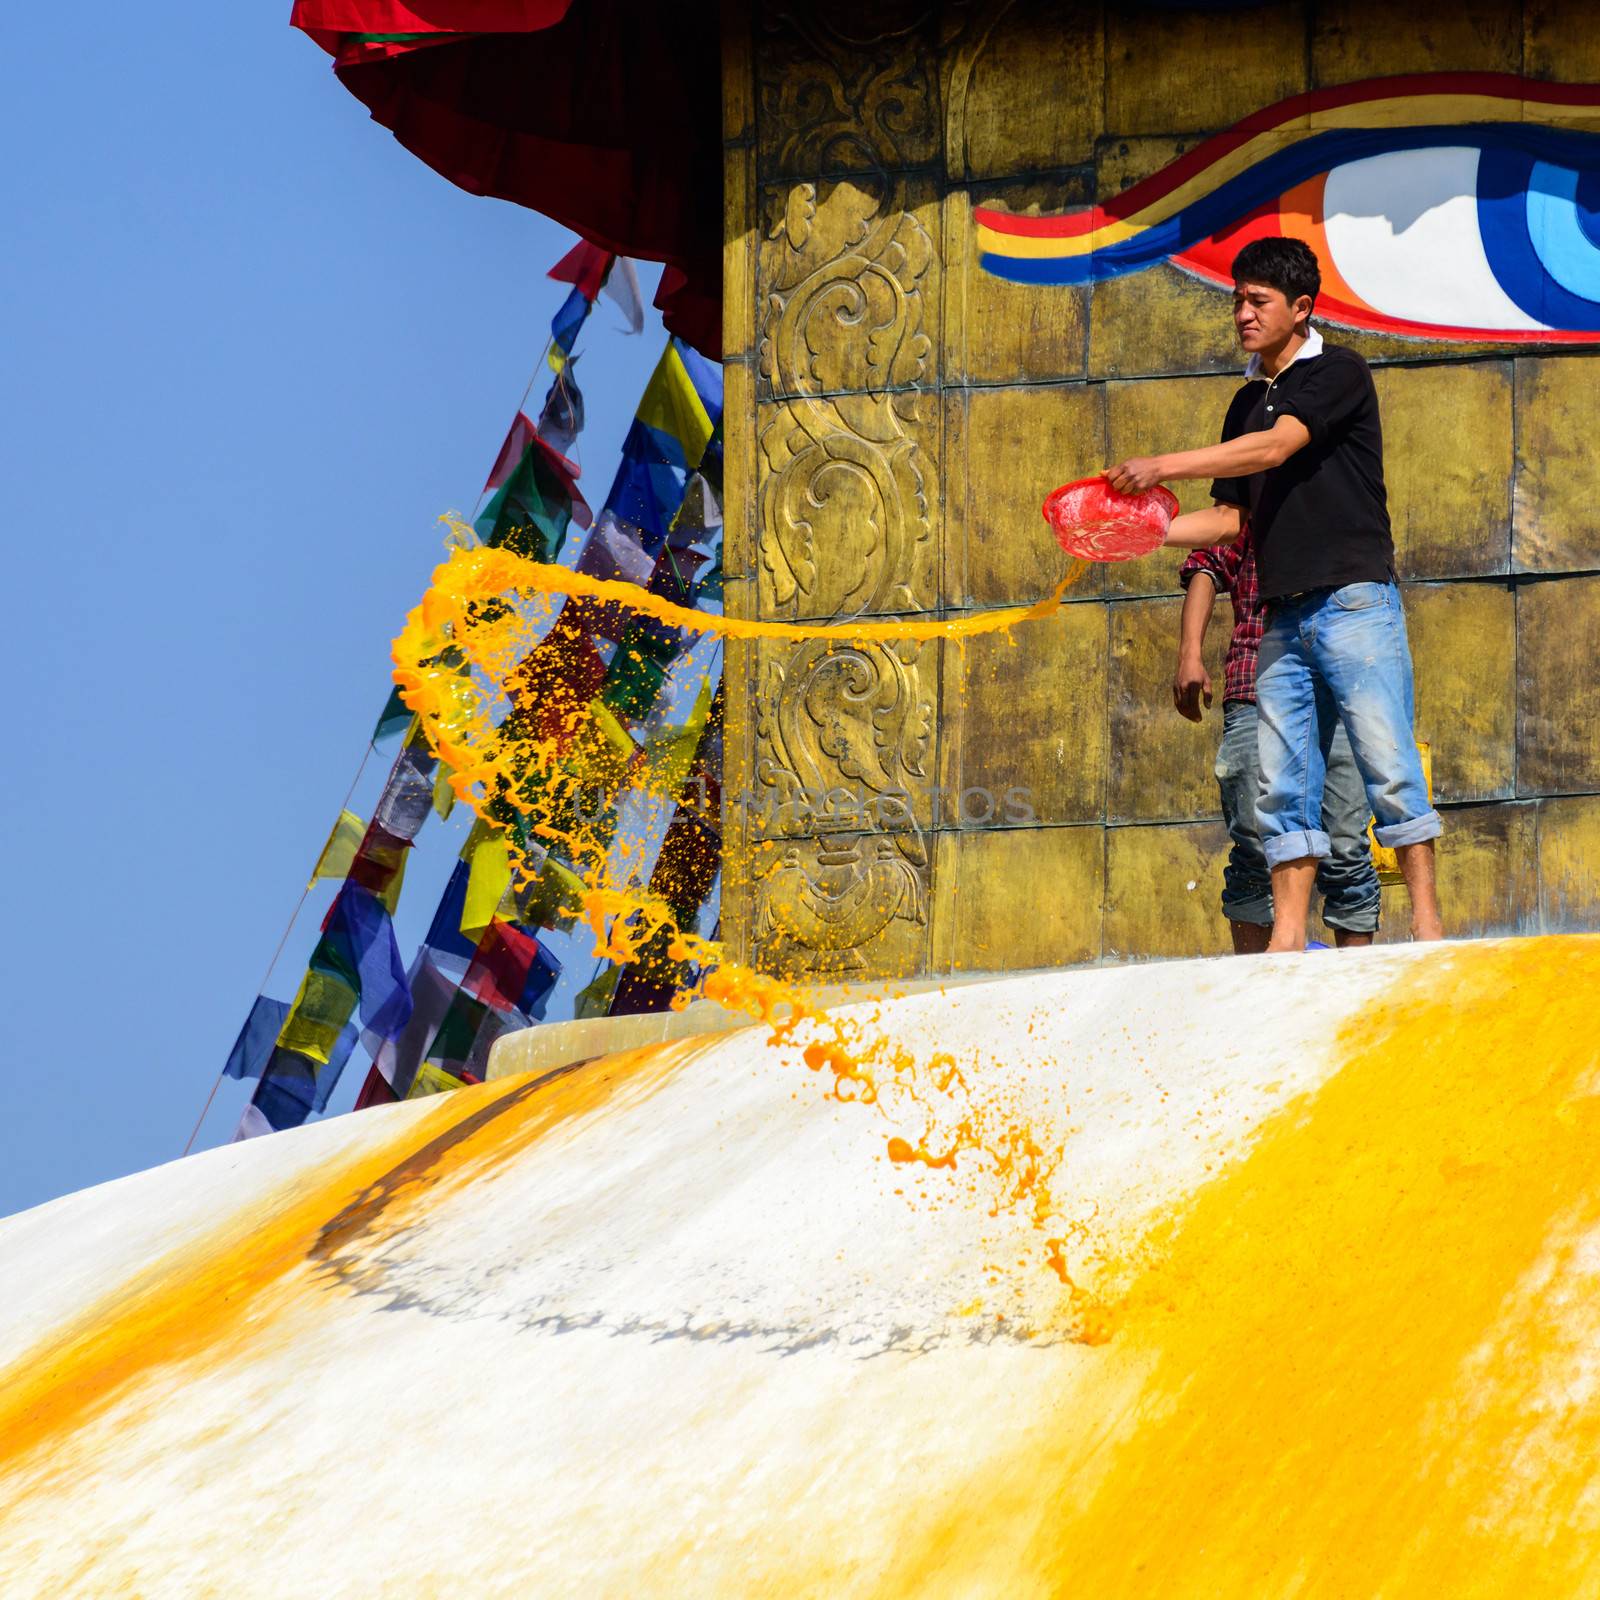 KATHMANDU, NEPAL - JANUARY 27, 2014: A man throws orange paint on Boudhanath Stupa as part of the renovation and painting work which will cost four million Nepalese Rupees.